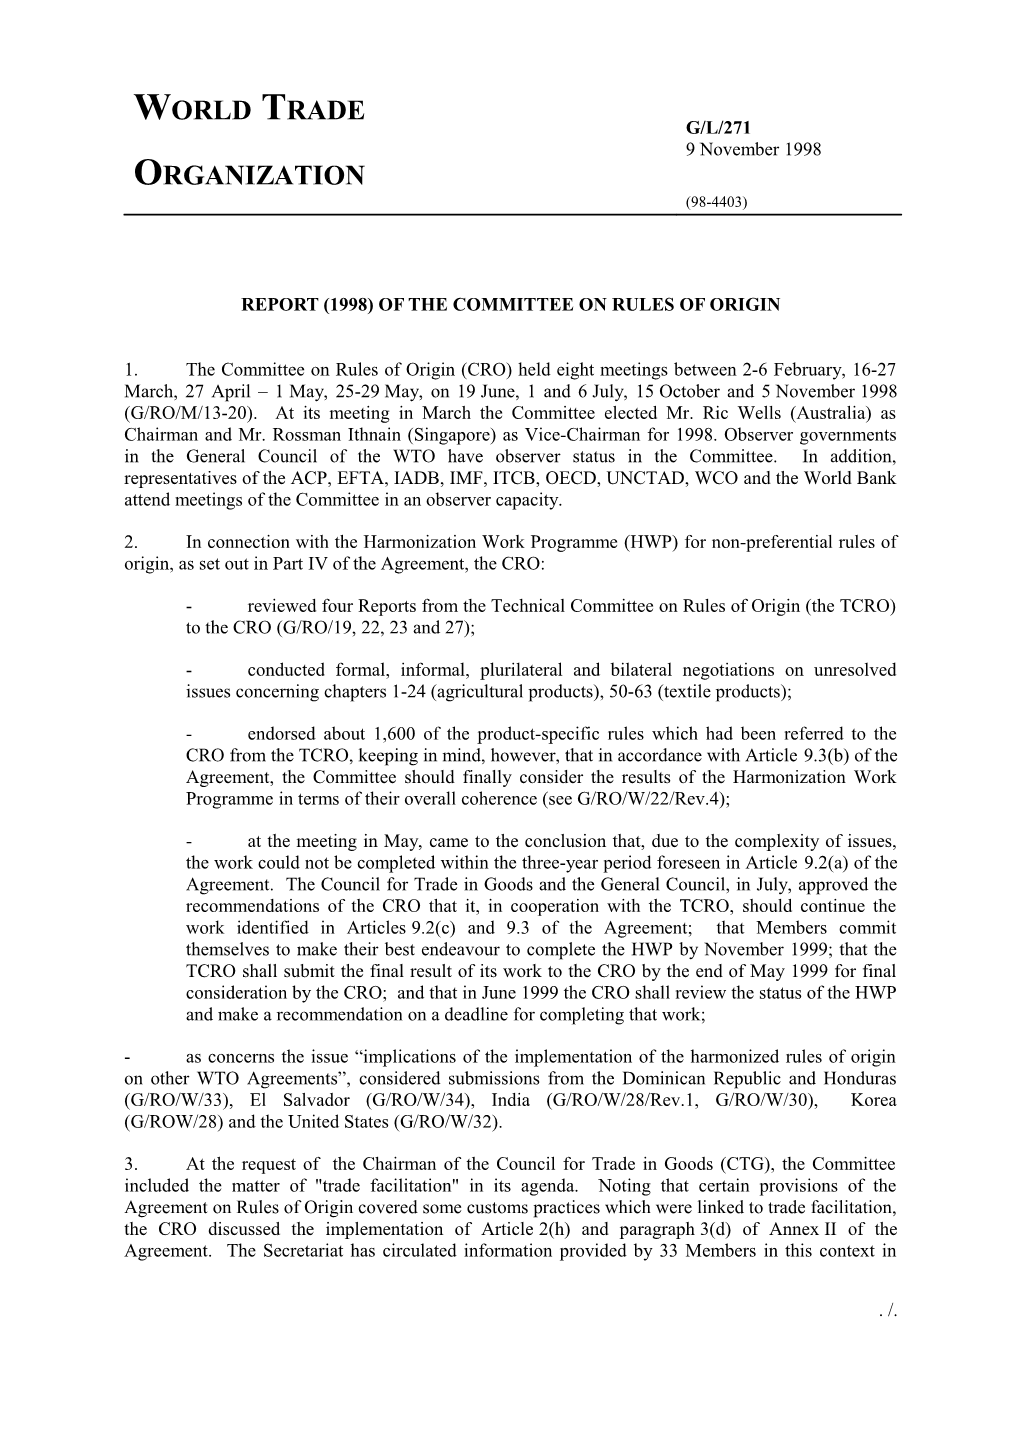 Report (1998) of the Committee on Rules of Origin